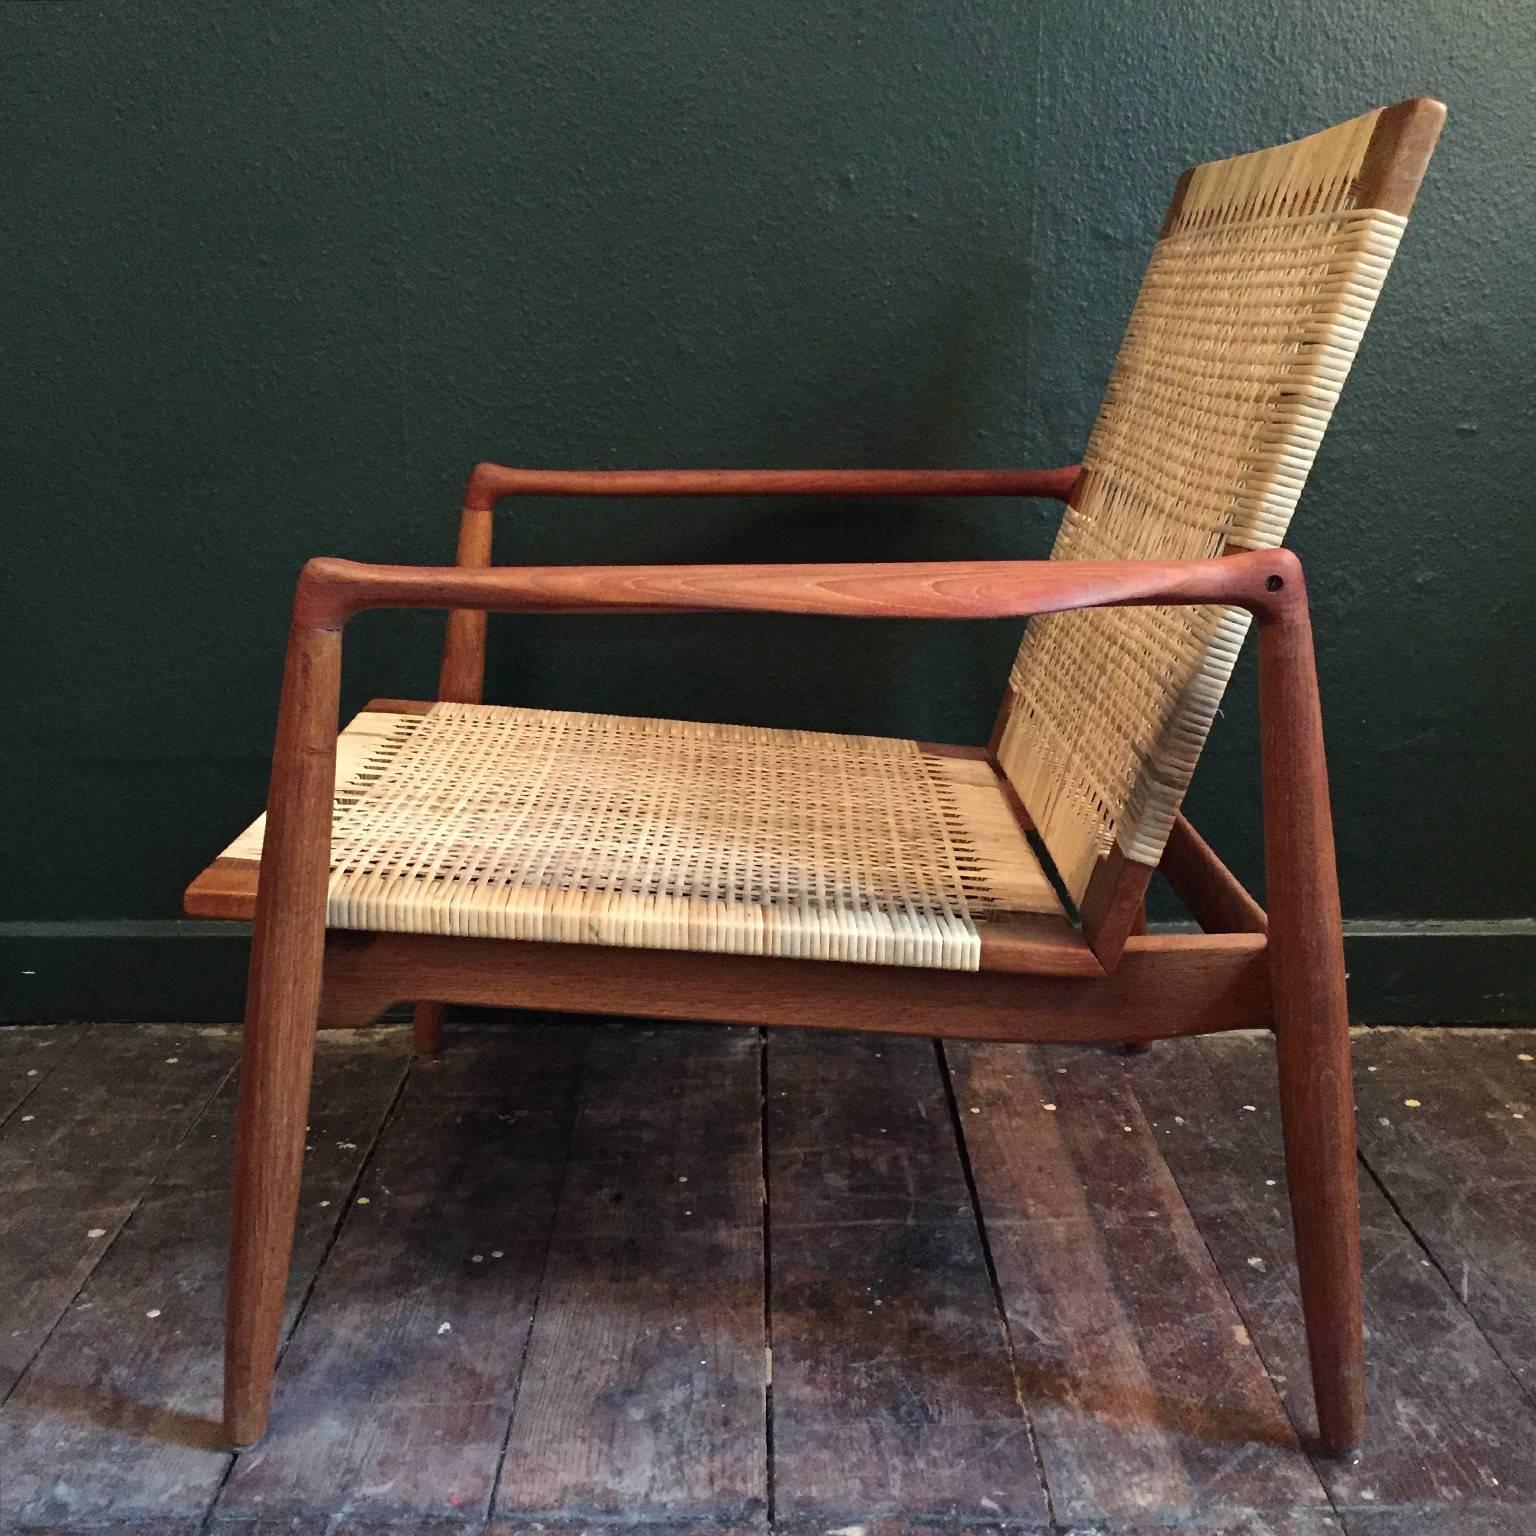 This beautiful piece of furniture was designed by Finn Juhl in 1954 and produced until 1959. It was produced by Danish cabinetmaker Soren Willadsen. The frame and legs are solid oak. The armrests are teak. The chair is upholstered with woven cane.